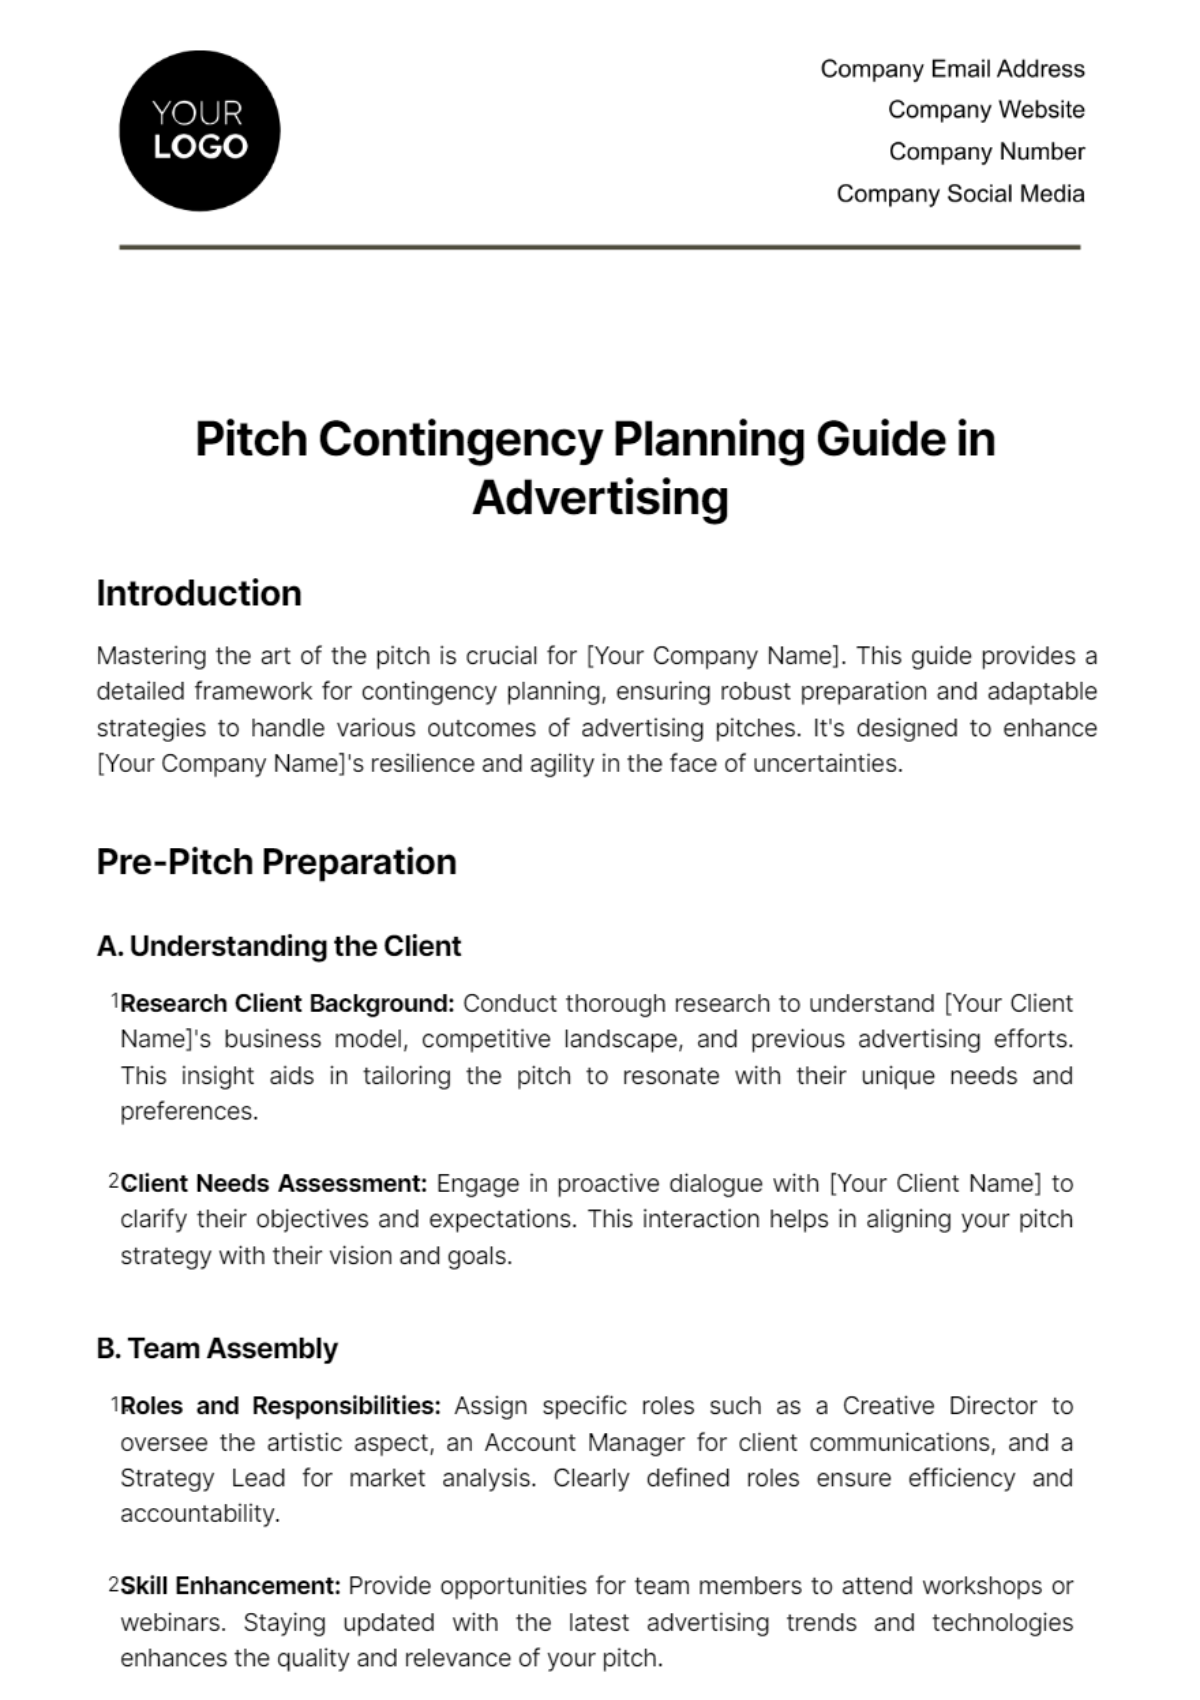 Pitch Contingency Planning Guide in Advertising Template